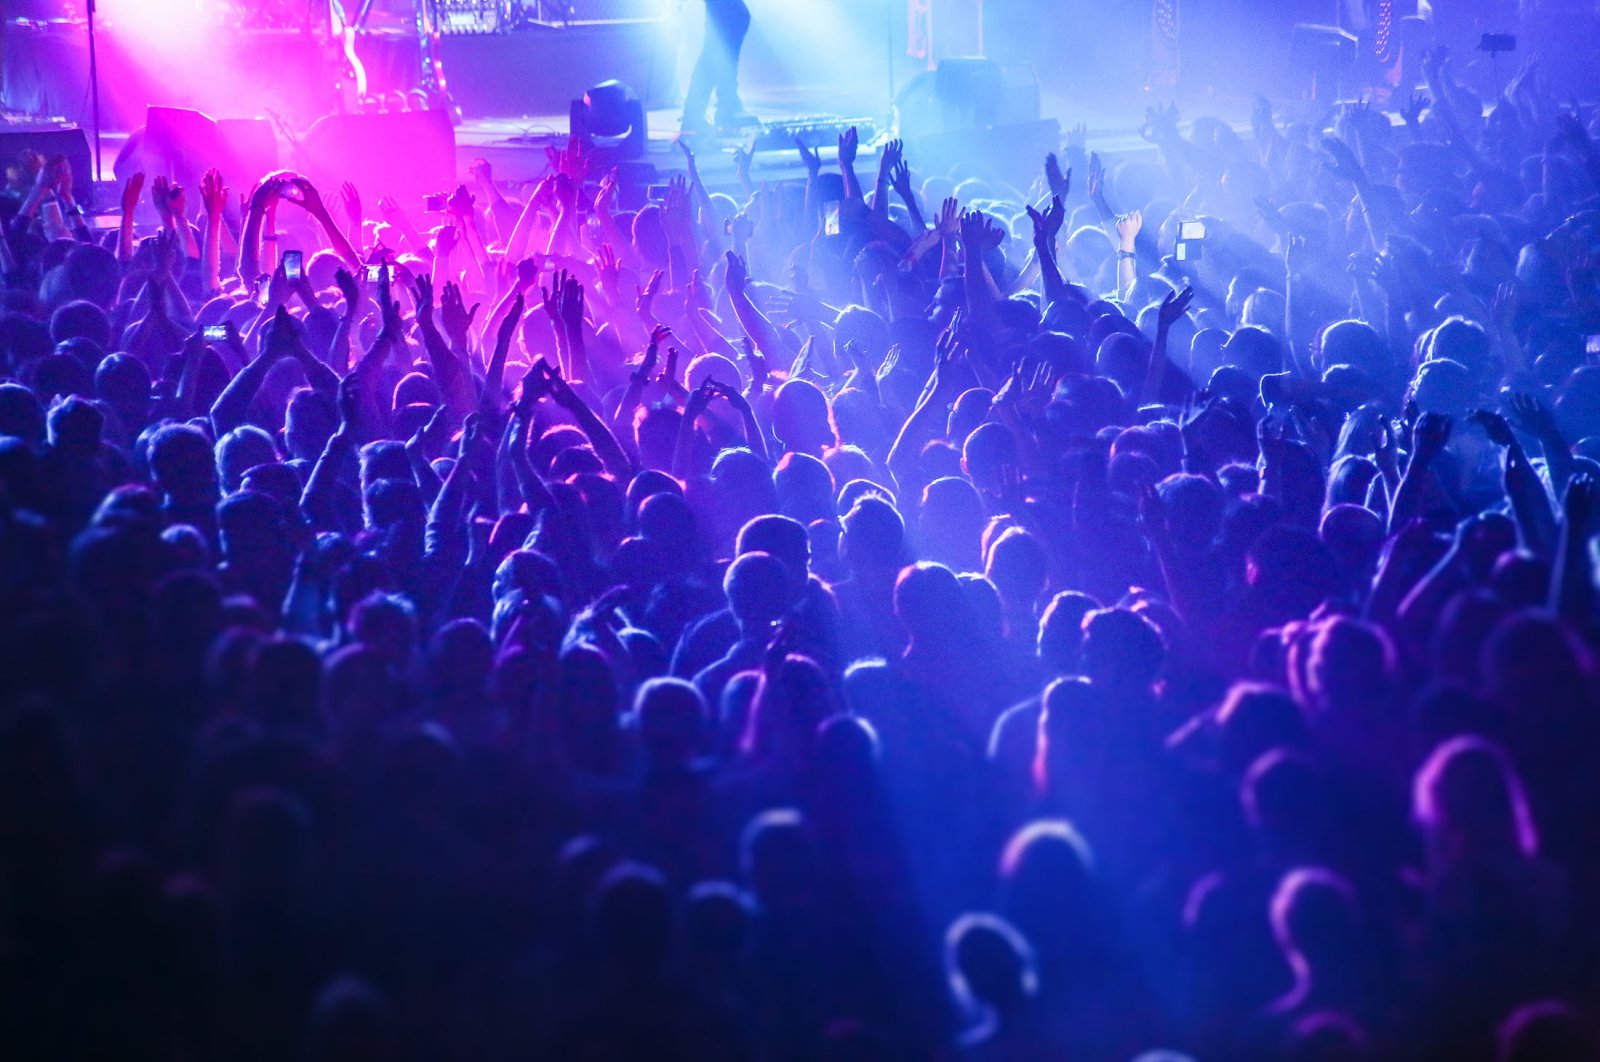 As the DJ turns up the bass, the crowd goes wild, and that might be an unconscious reaction. (Shutterstock Photo)